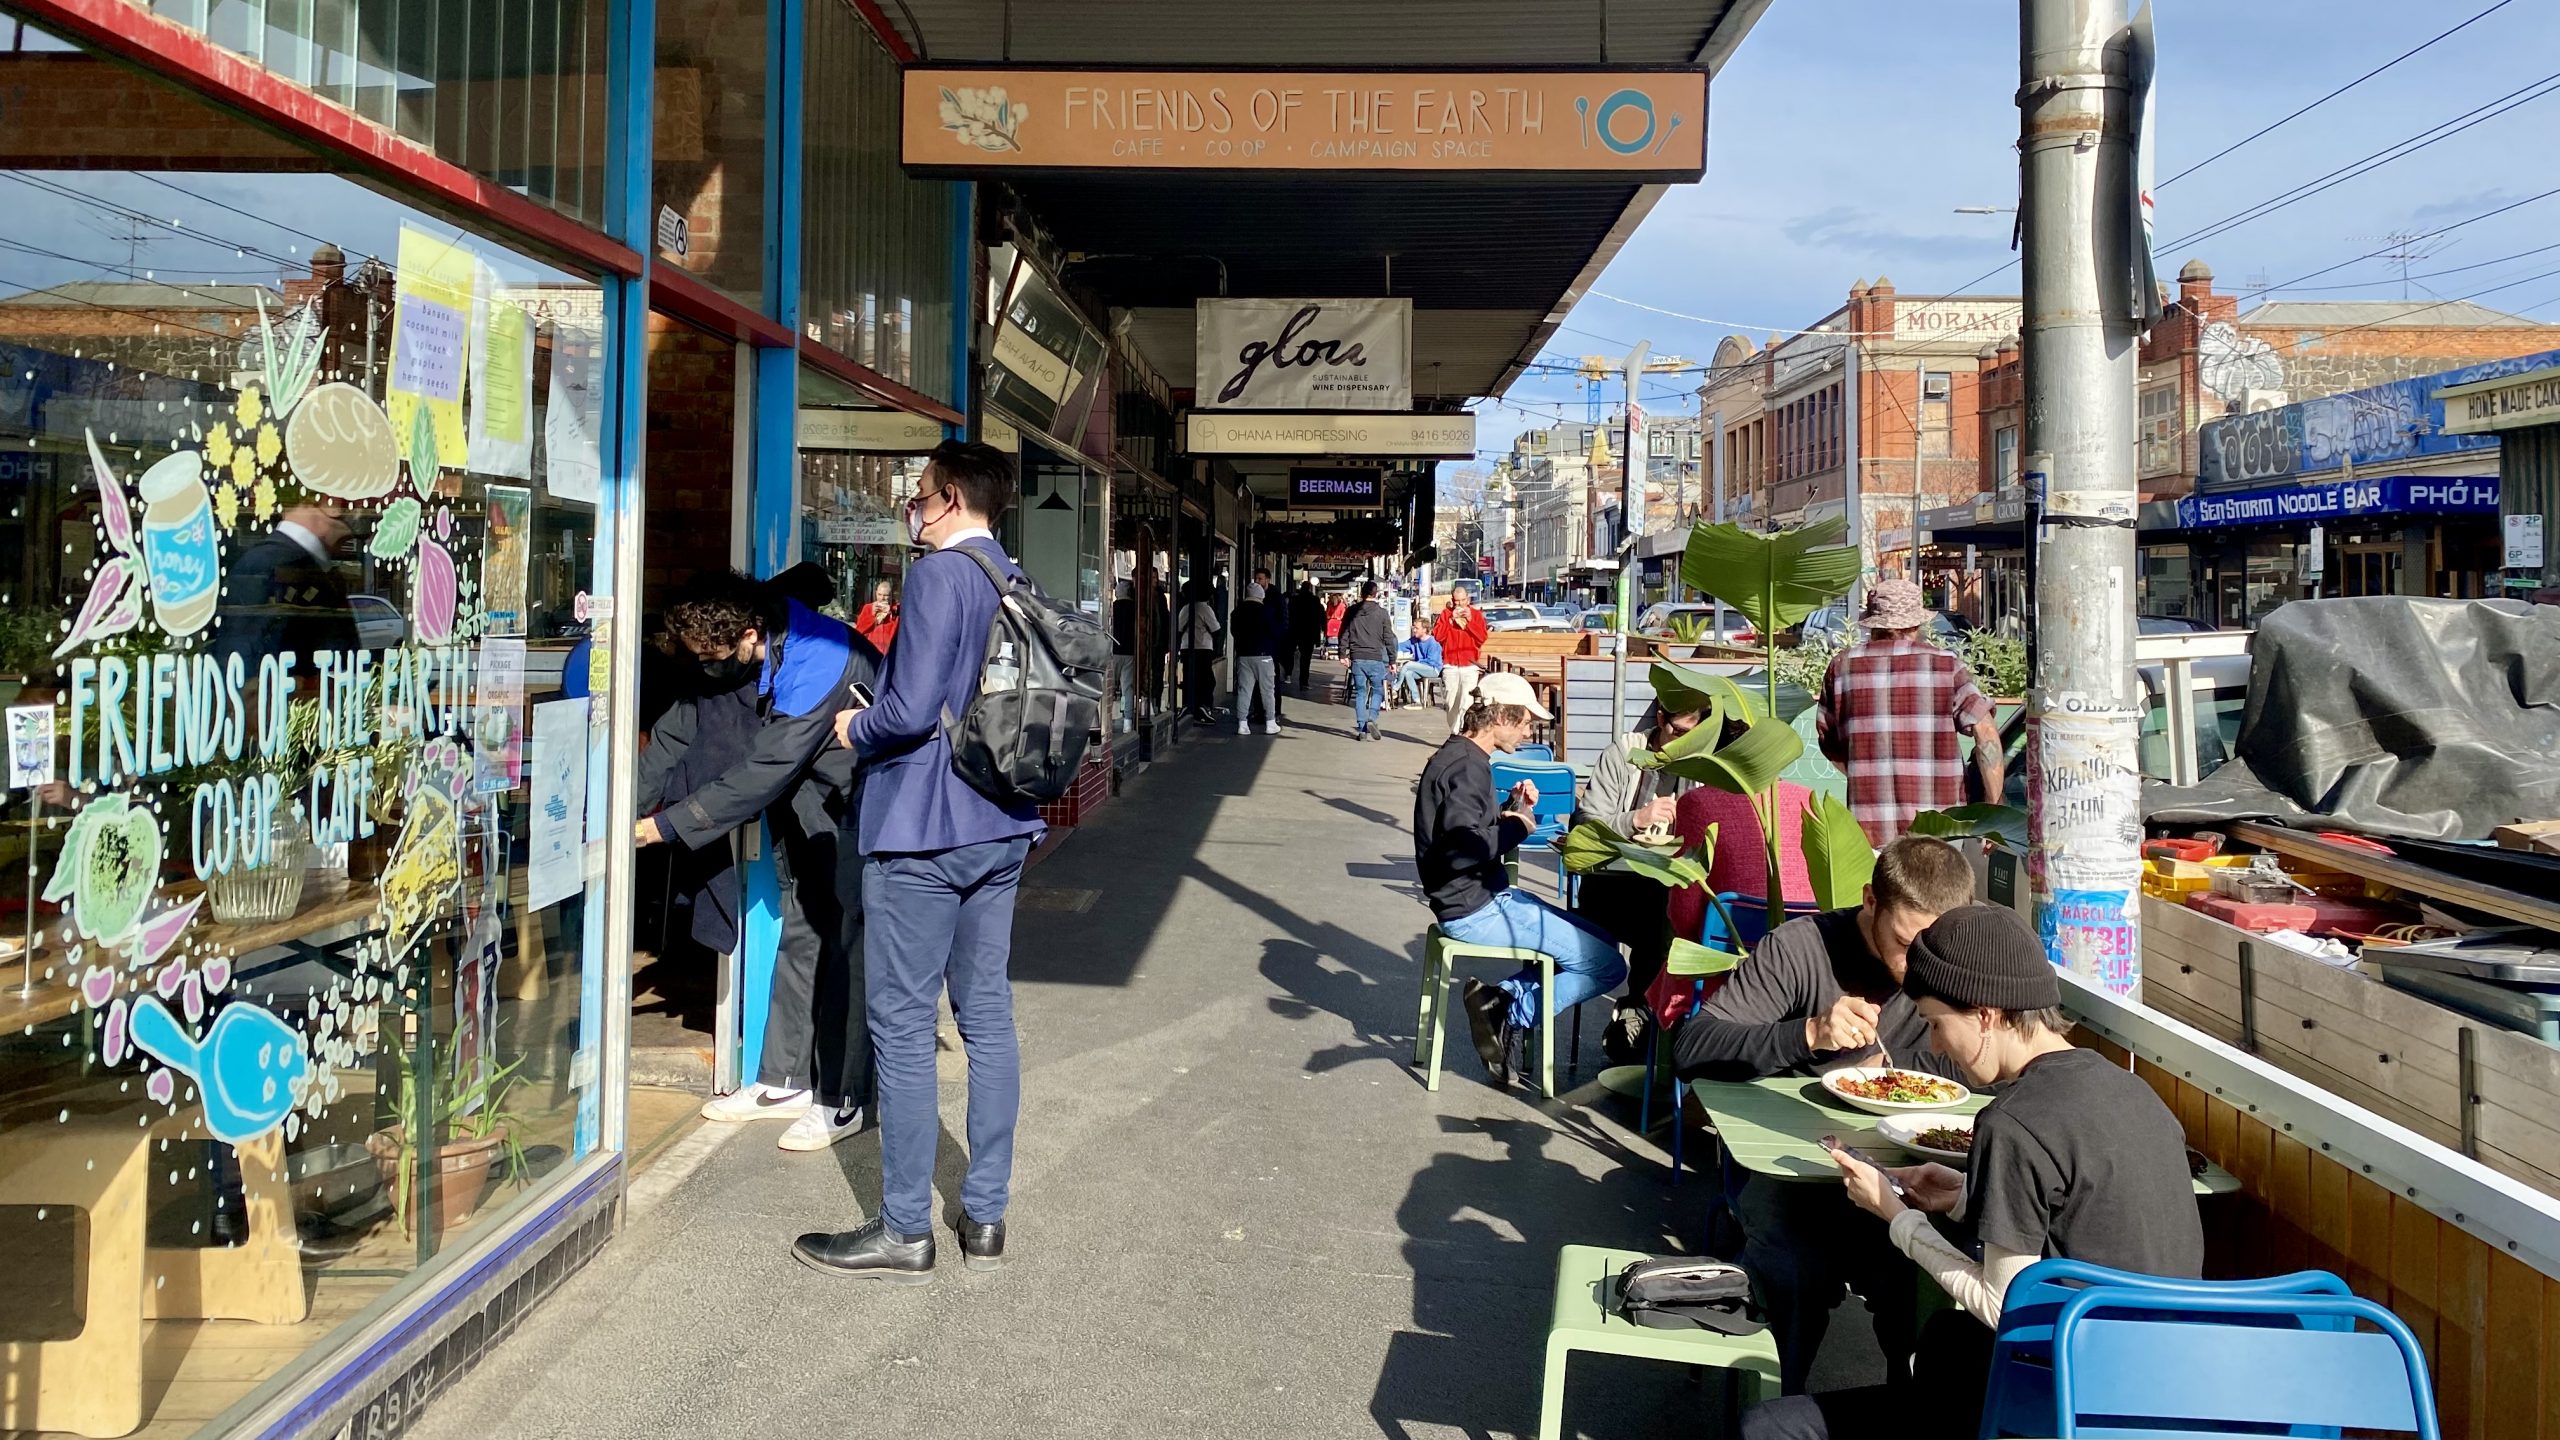 Smith Street Collingwood offer an eclectic mix of cafes and retaurants